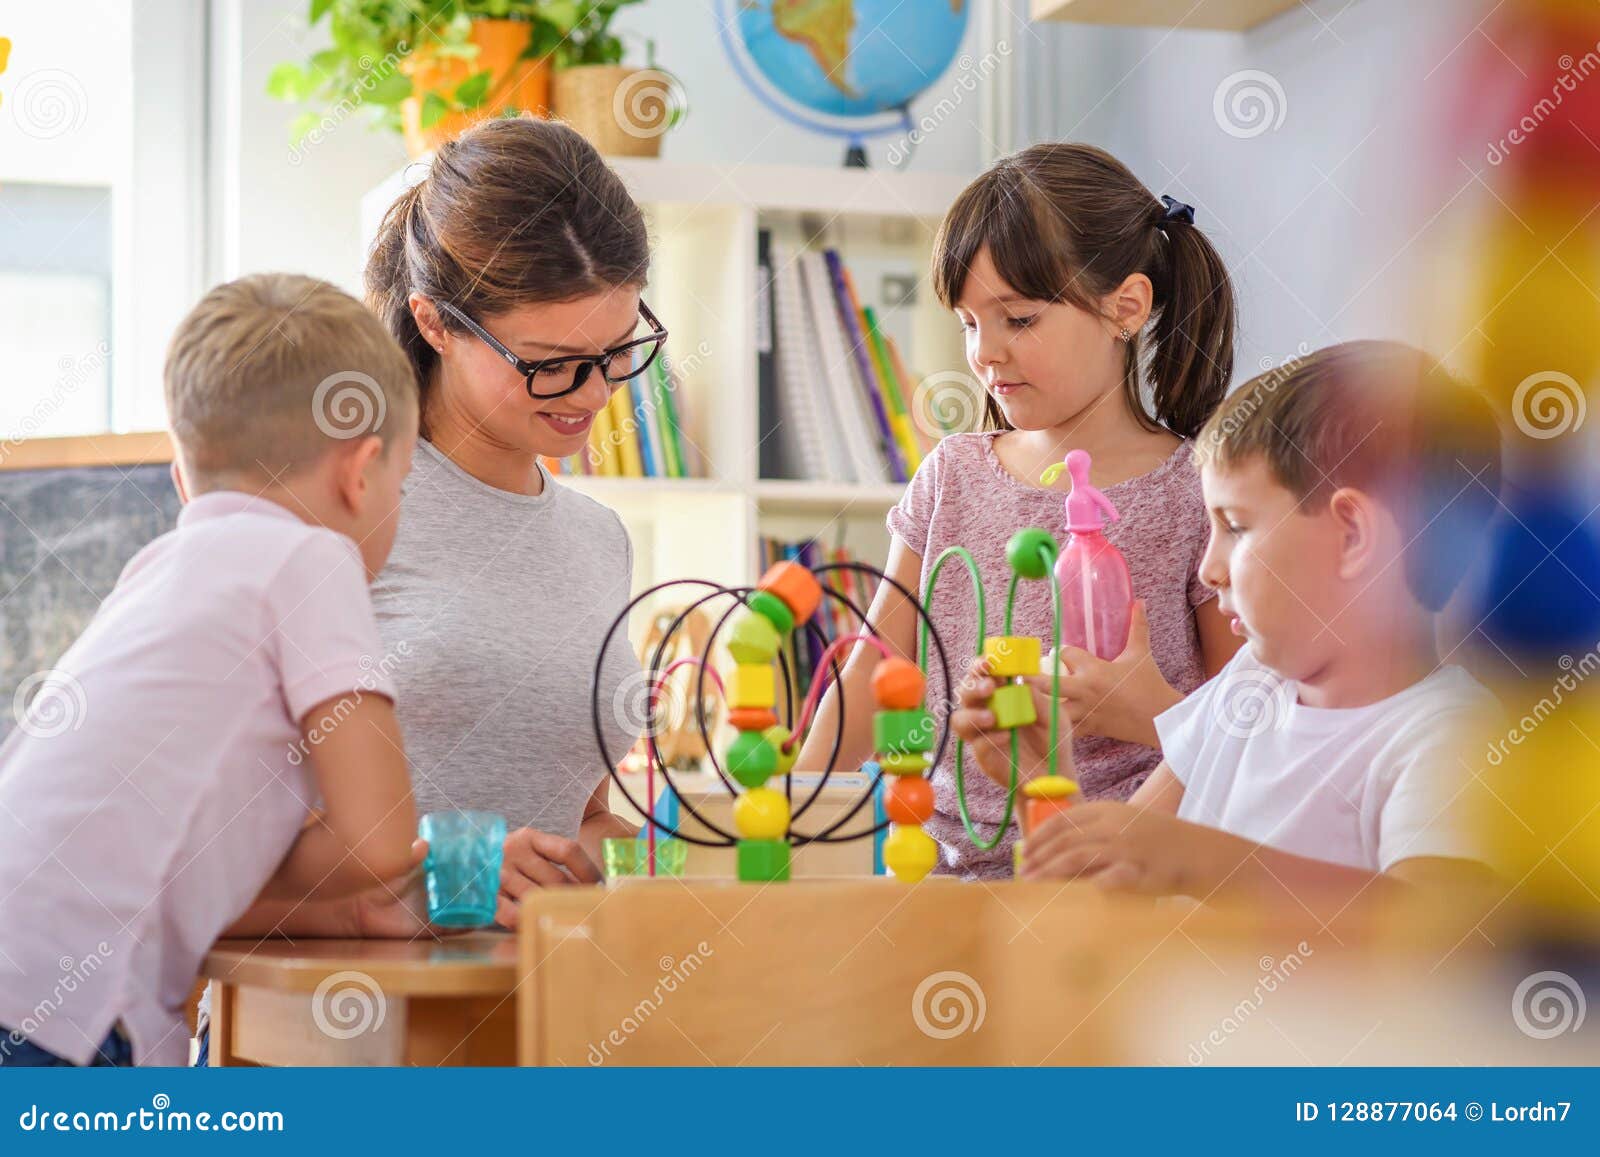 Preschool Teacher With Children Playing With Colorful Didactic Toys At